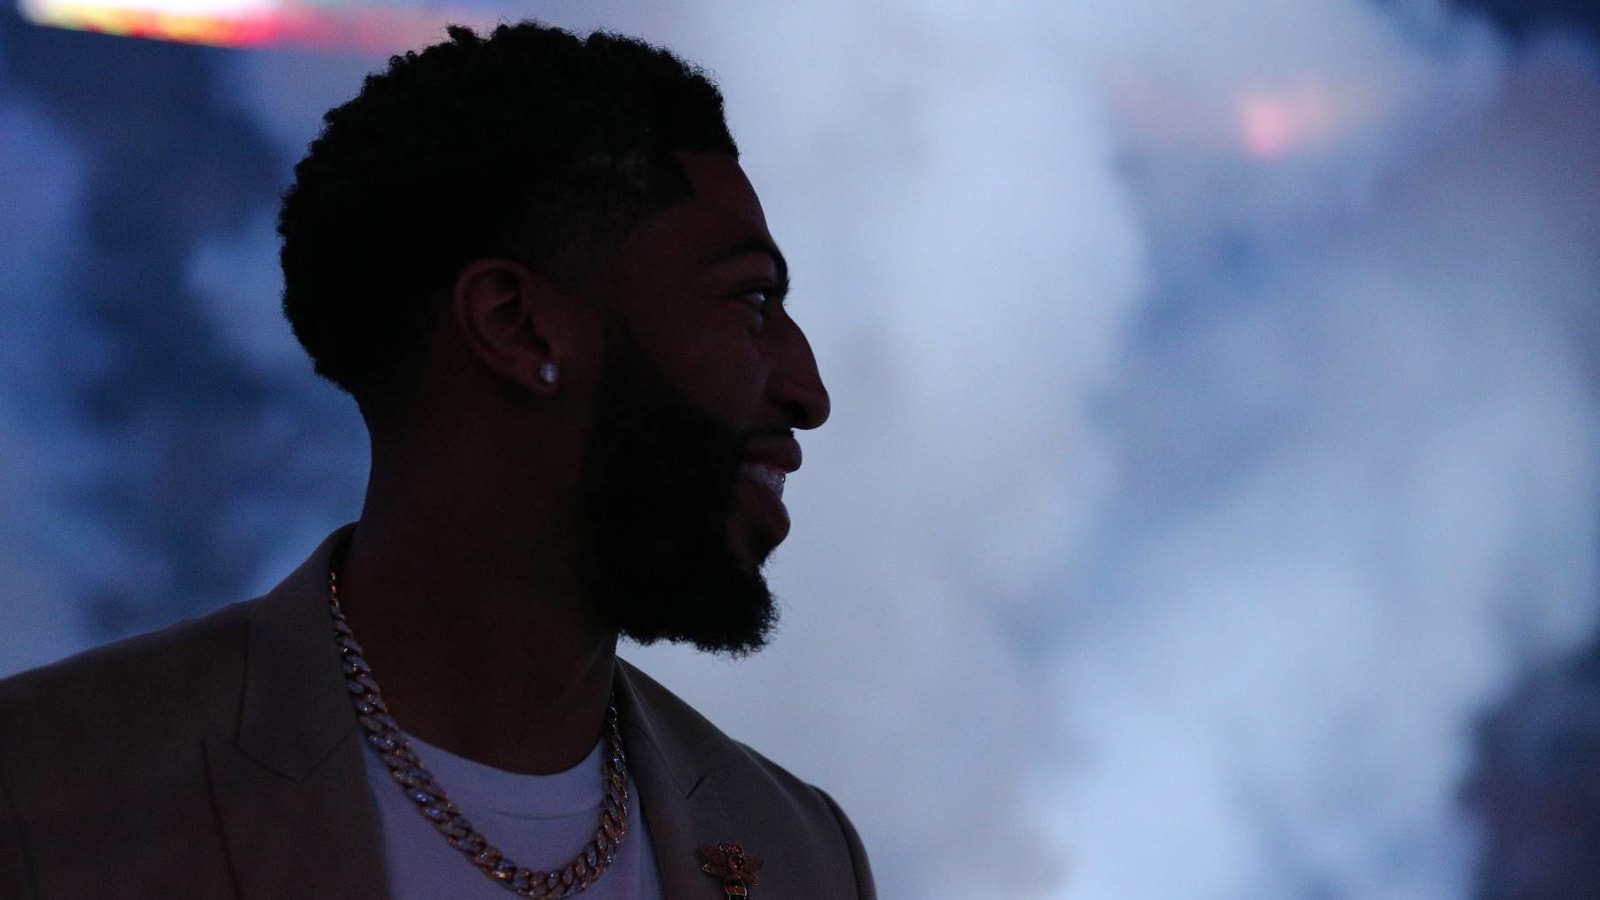 It's prime time for Anthony Davis to claim title as 'Best Player in World'